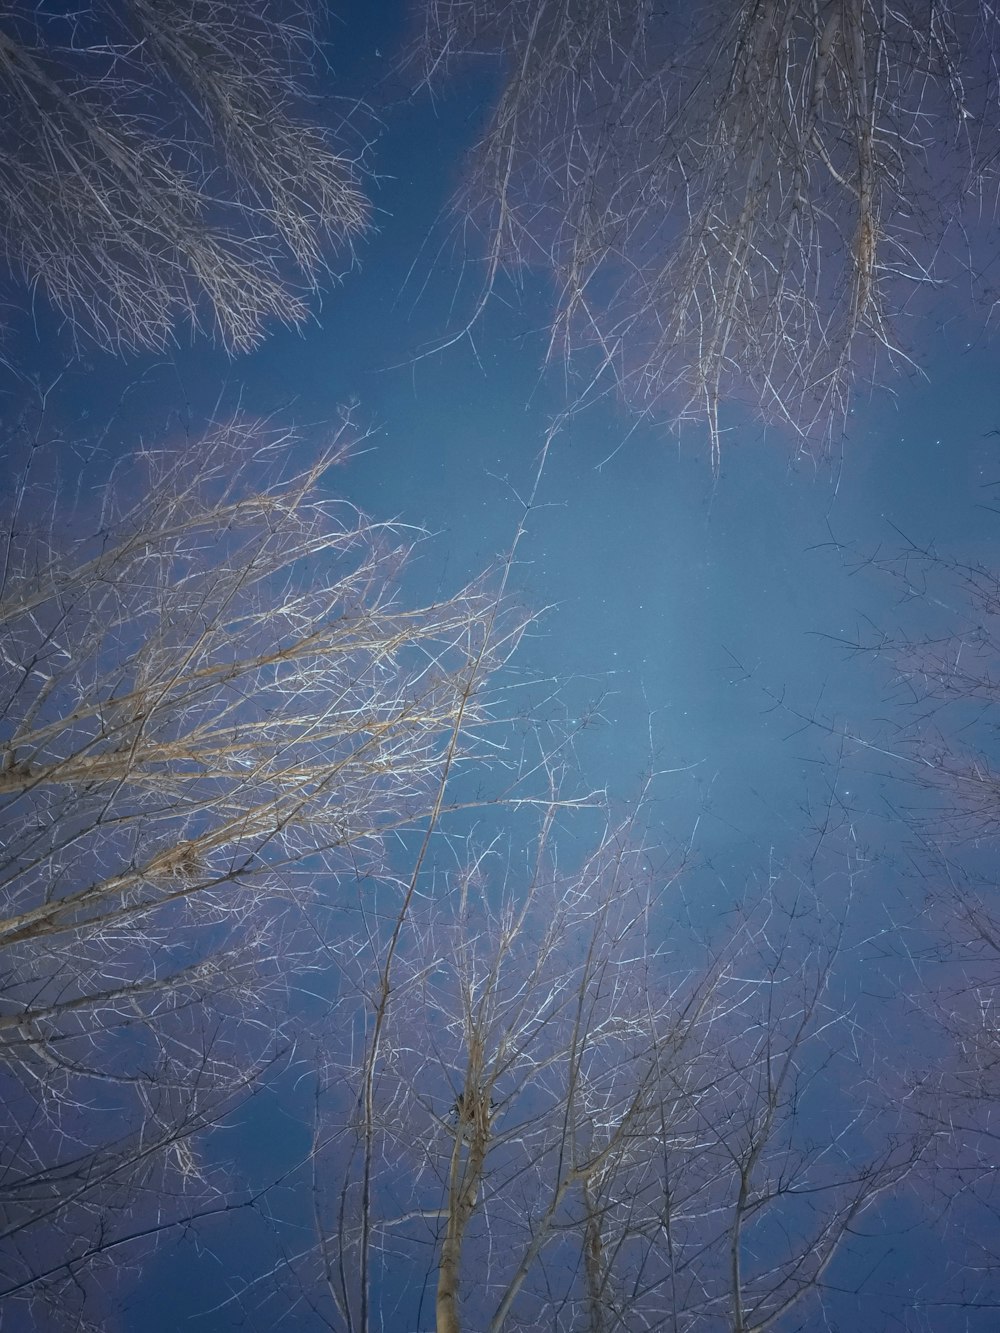 looking up at the sky through the branches of a tree